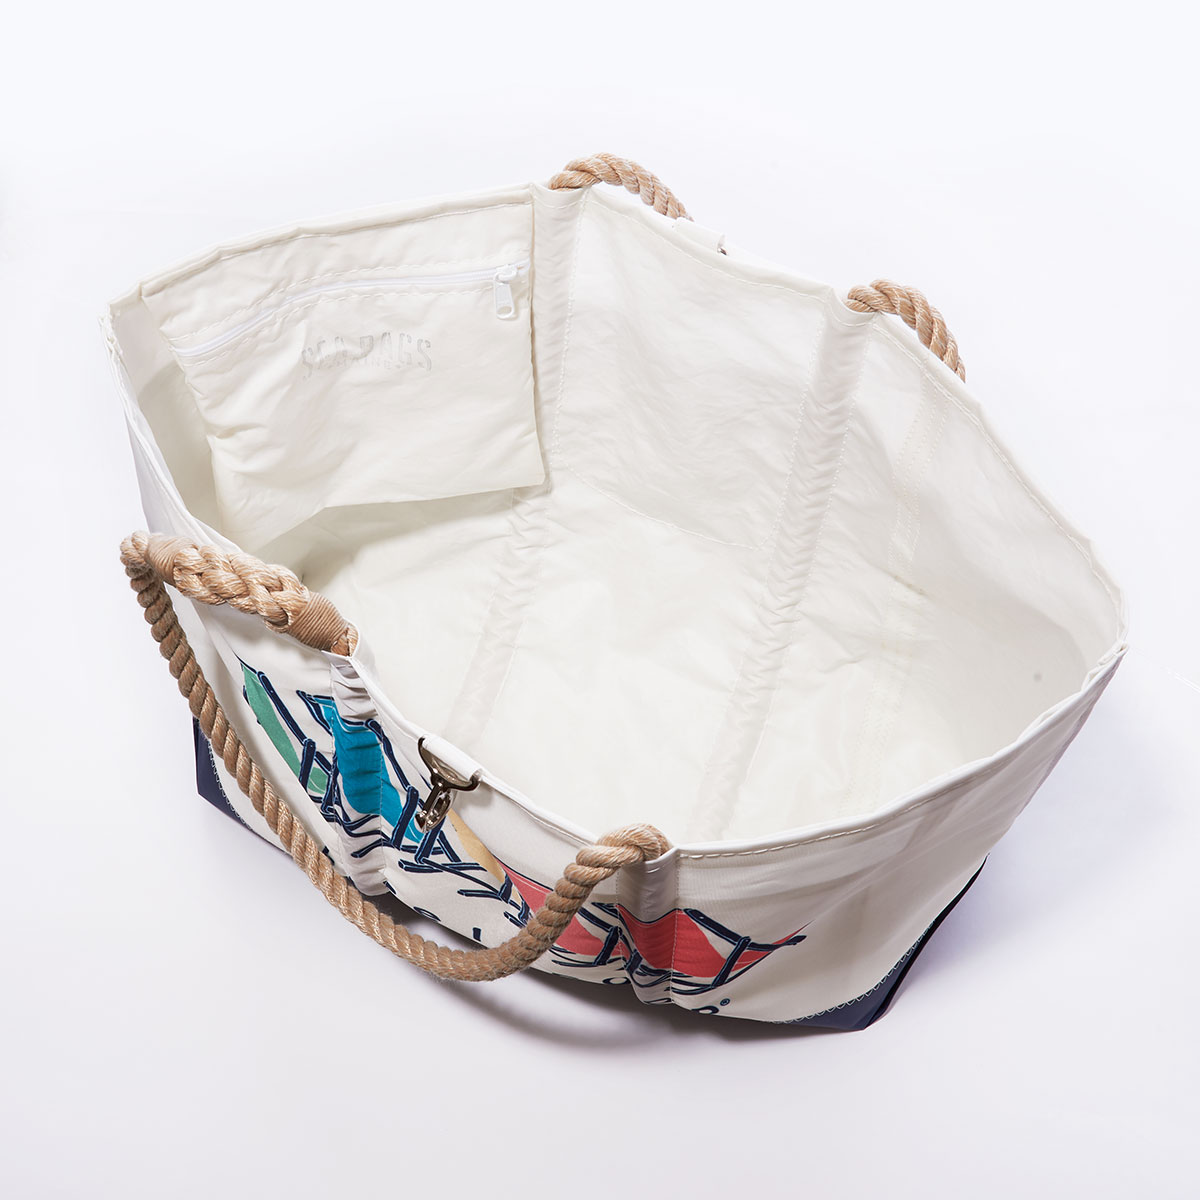 inside view showing hanging interior pocket of a white recycled sail cloth tote with hemp rope handles has a navy bottom and is printed with five beach chairs in red orange yellow green and blue with the life is good brand name under the chairs